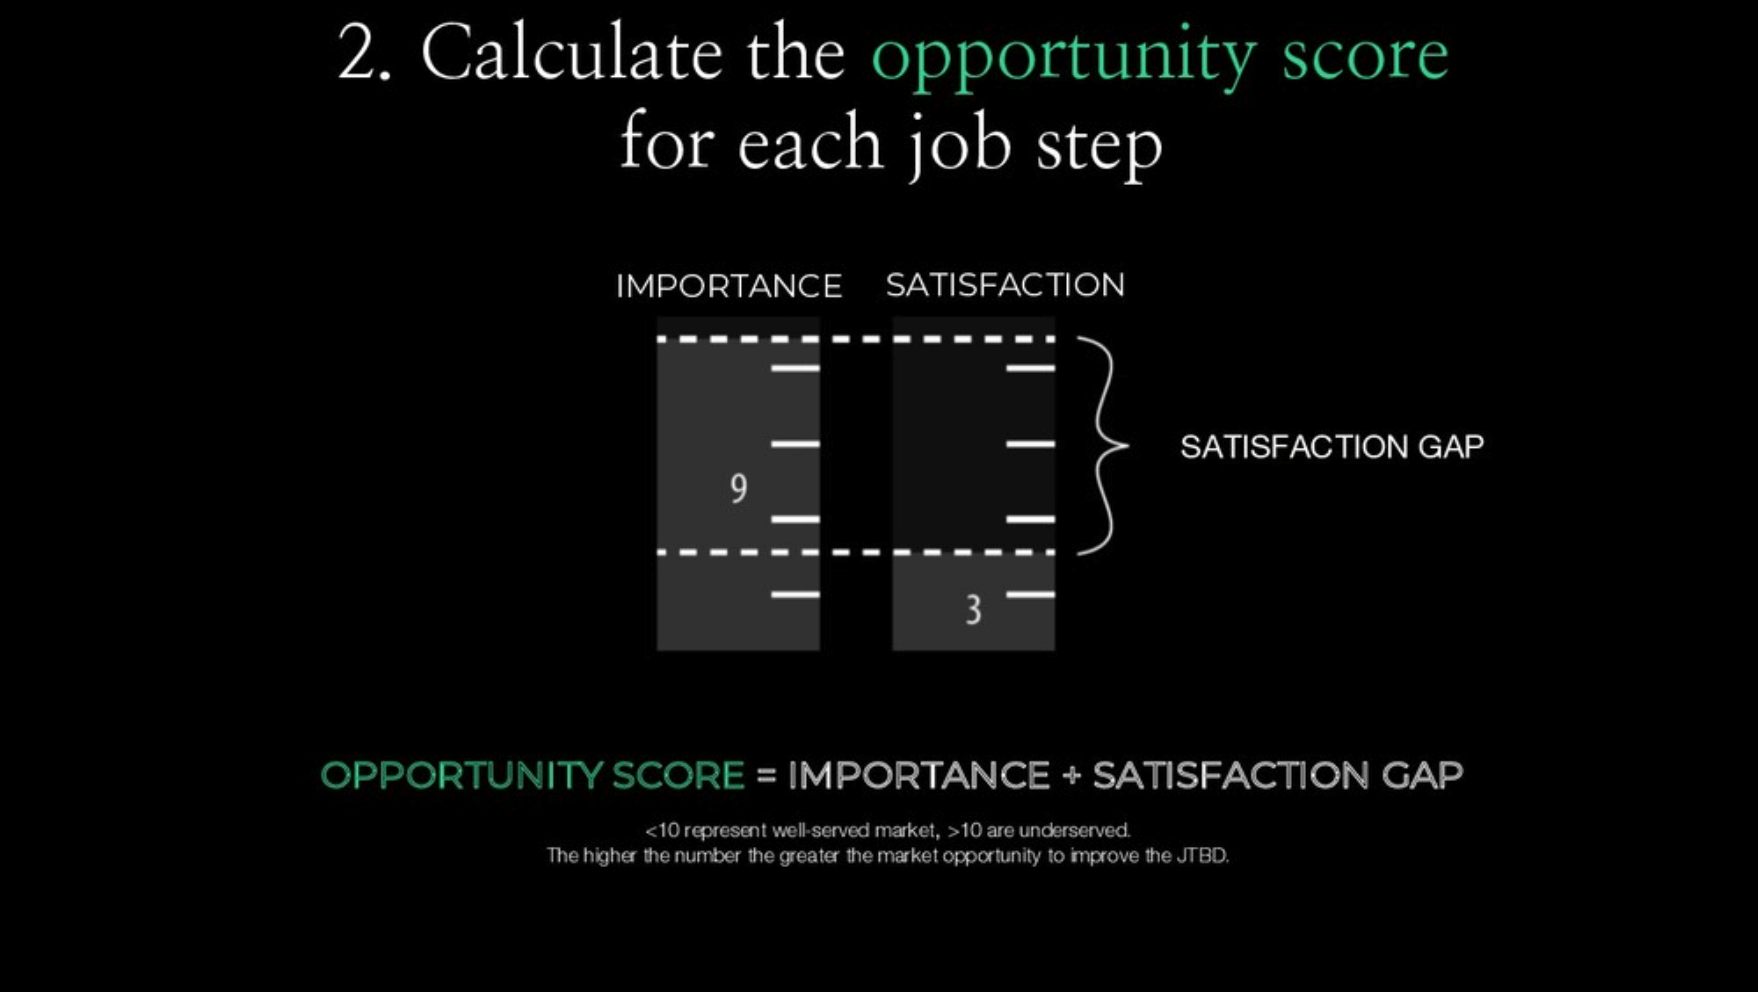 Calculate the opportunity score for each job step.